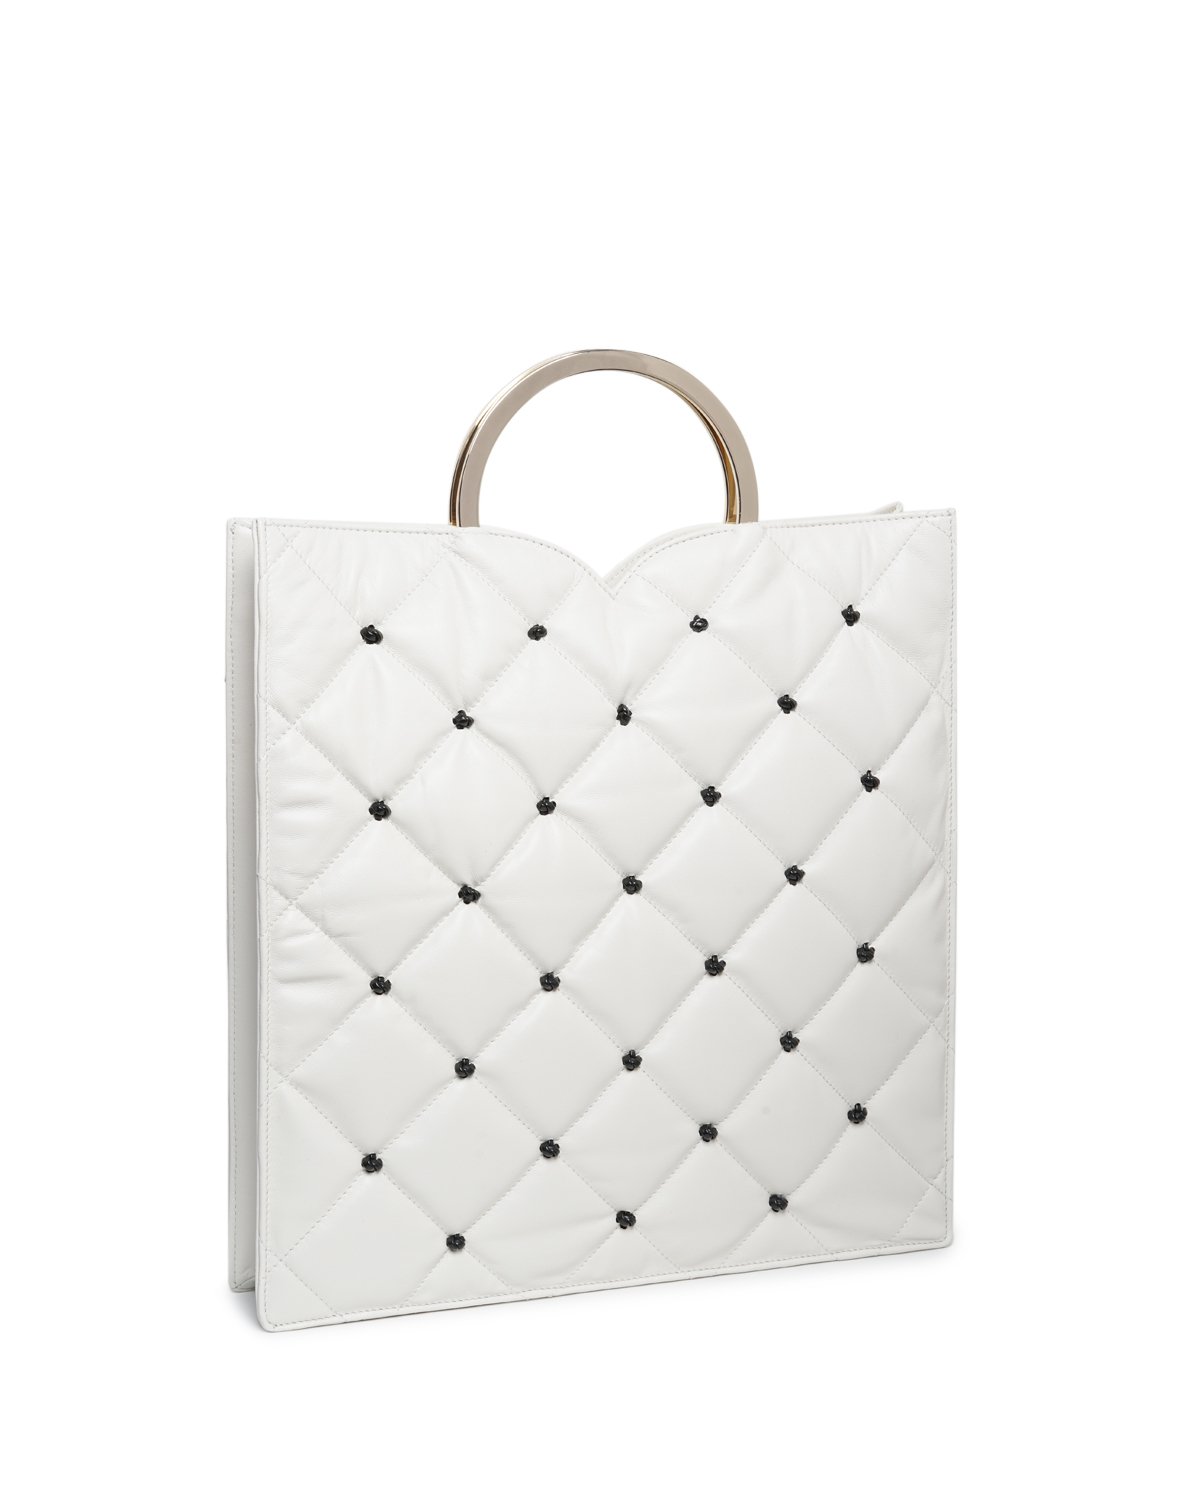 White quilted leather bag | Accessories | Genny